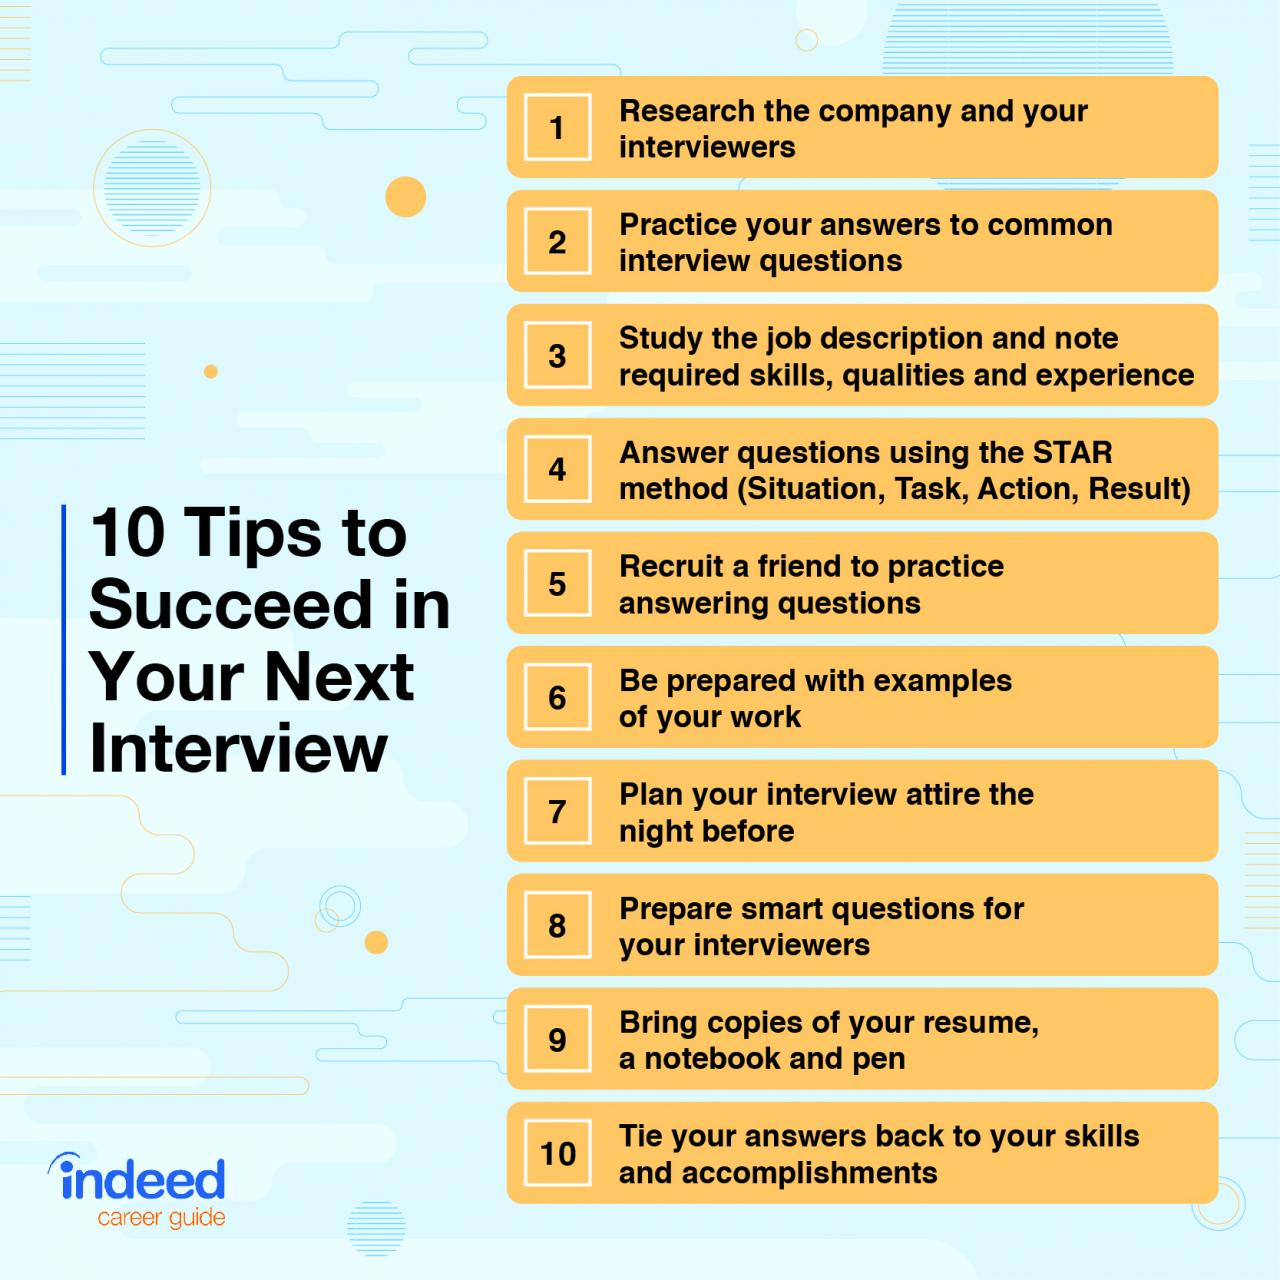 How can you prepare for an interview